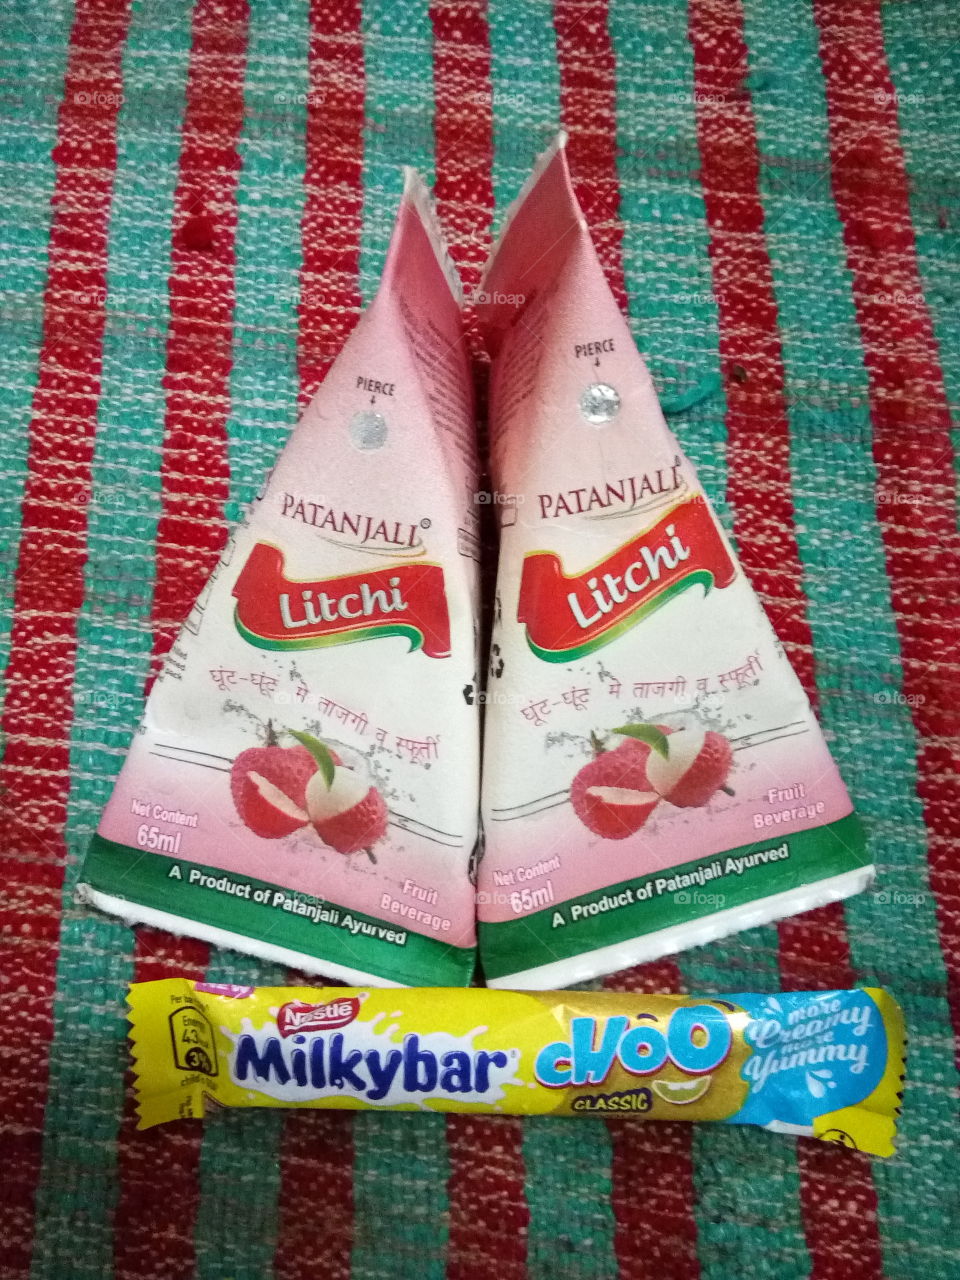 Patanjali Litchi and Milkybar chocolate- eat healthy, drink healthy stay fit.